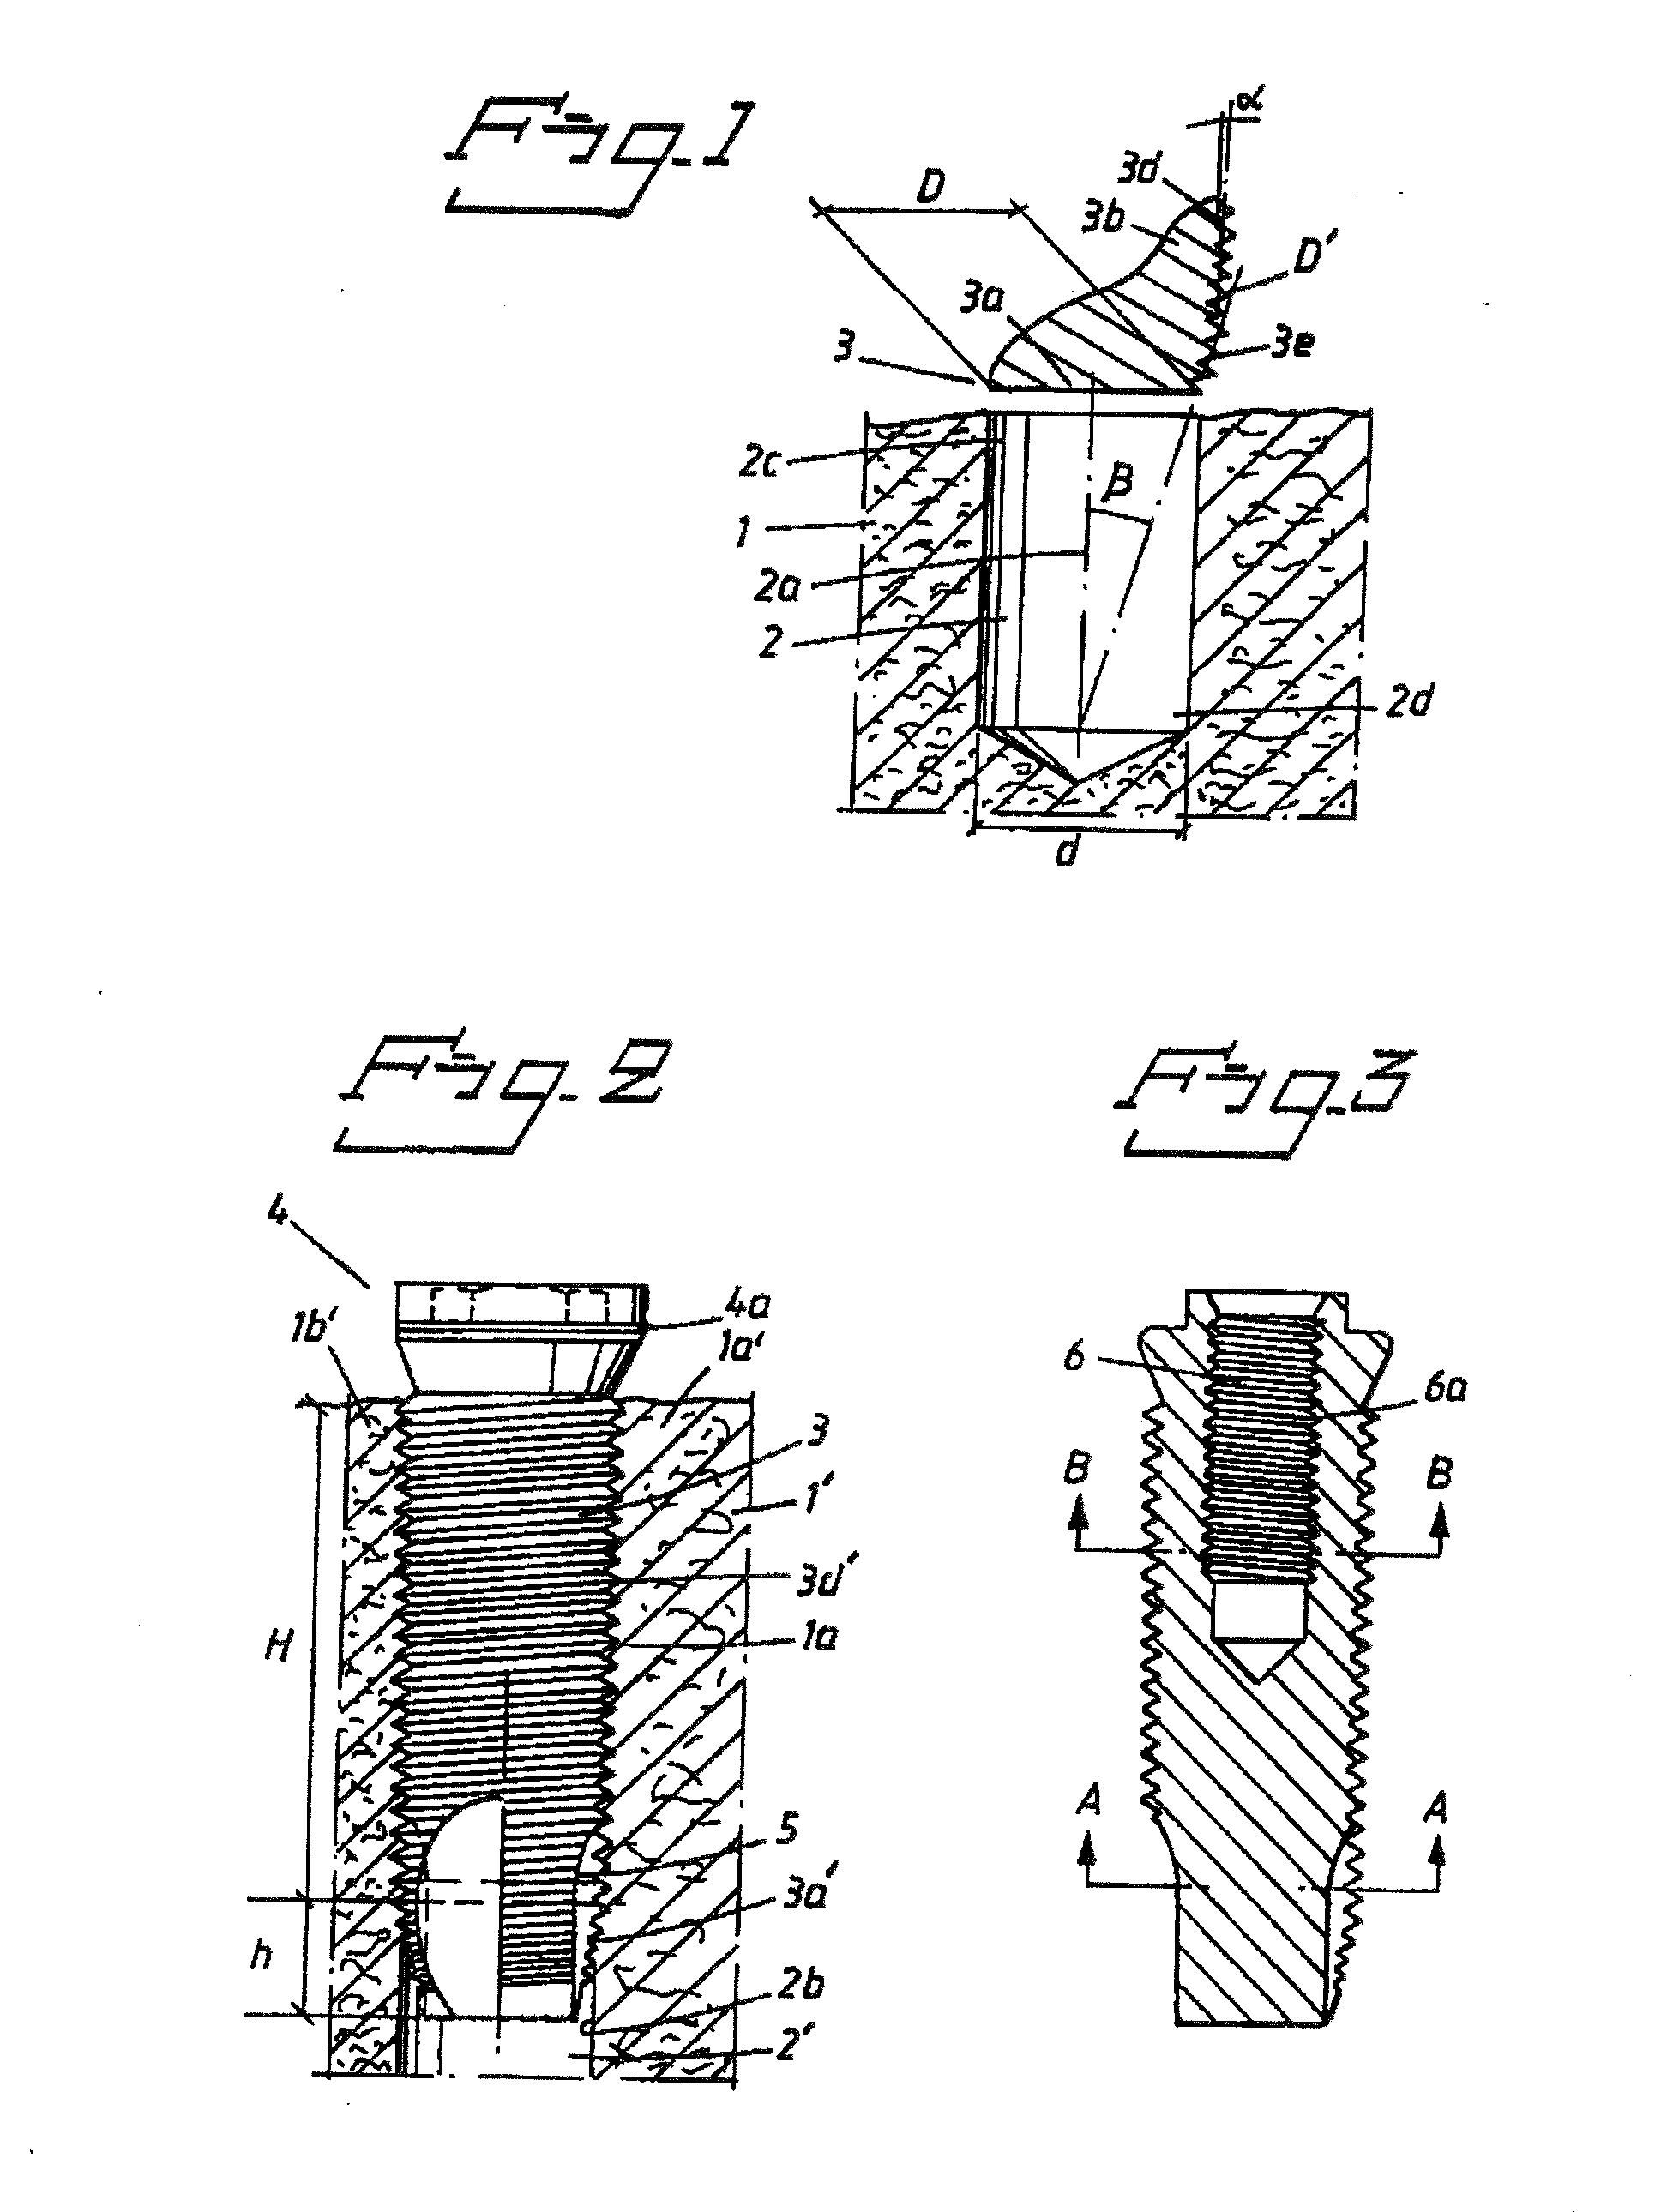 Arrangement for Obtaining Reliable Anchoring of a Threaded Implant in a Bone